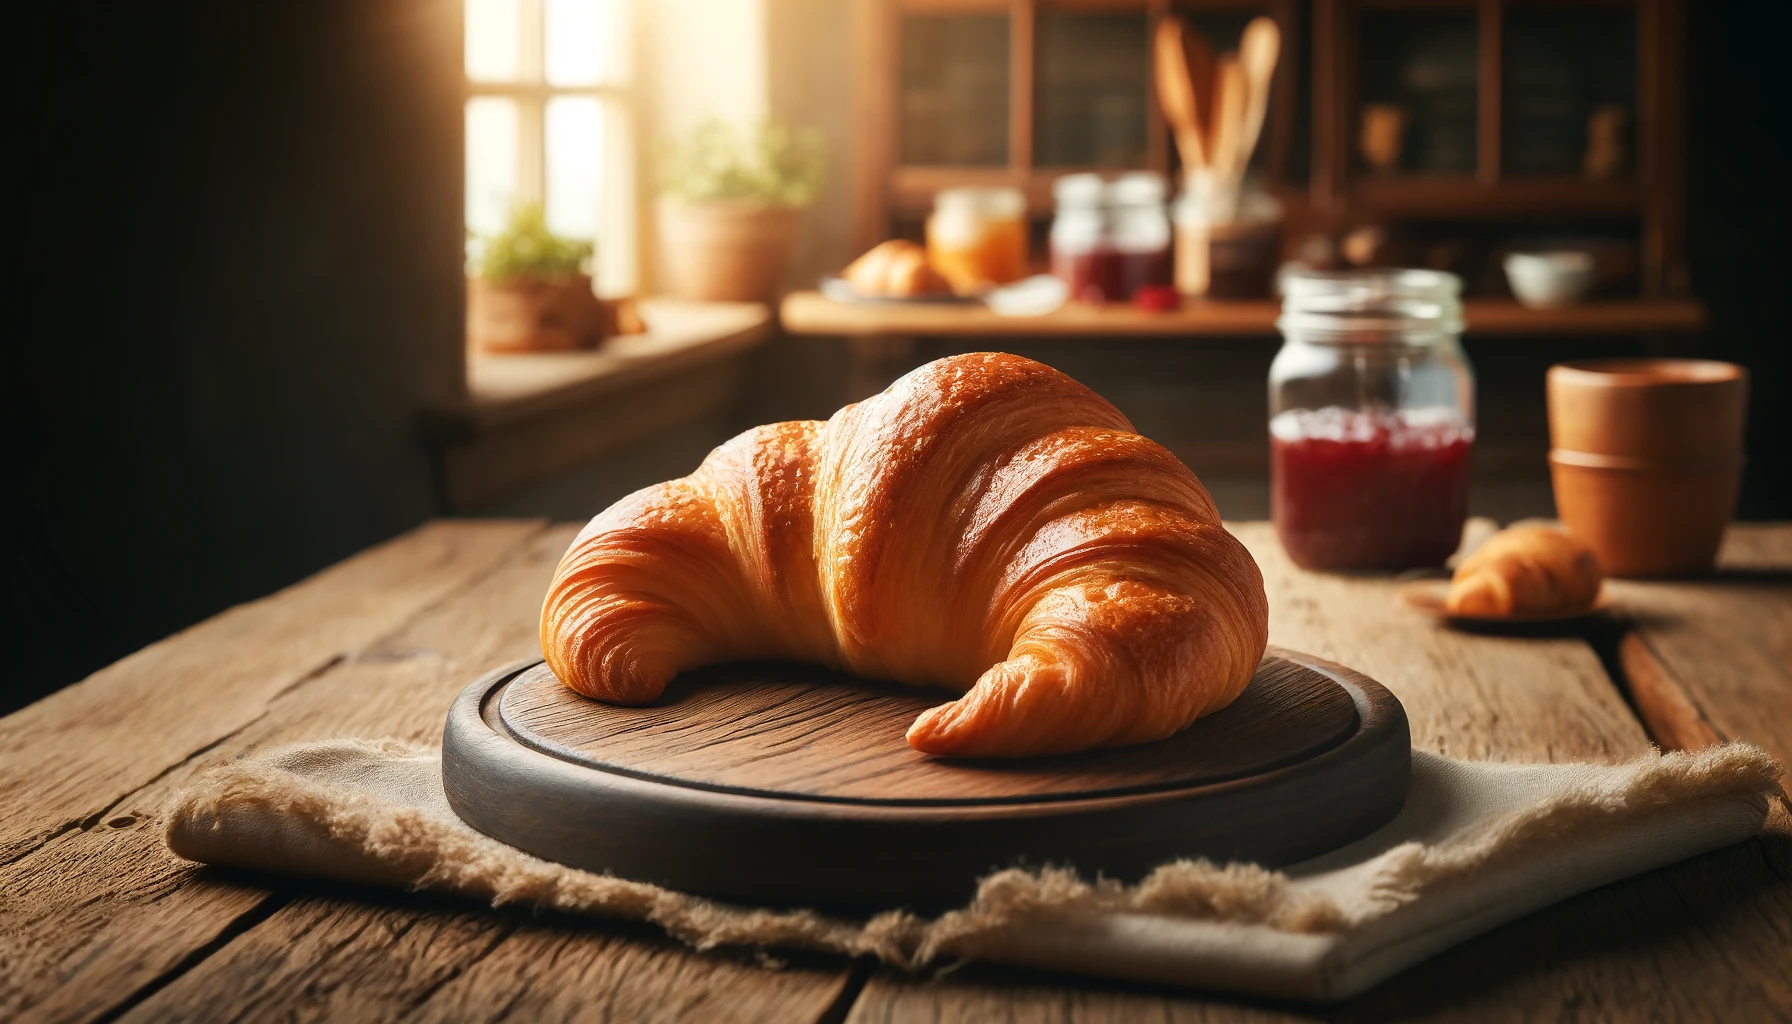 The Croissant: France Didn’t Invent It, but We’ll Let Them Have the Glory